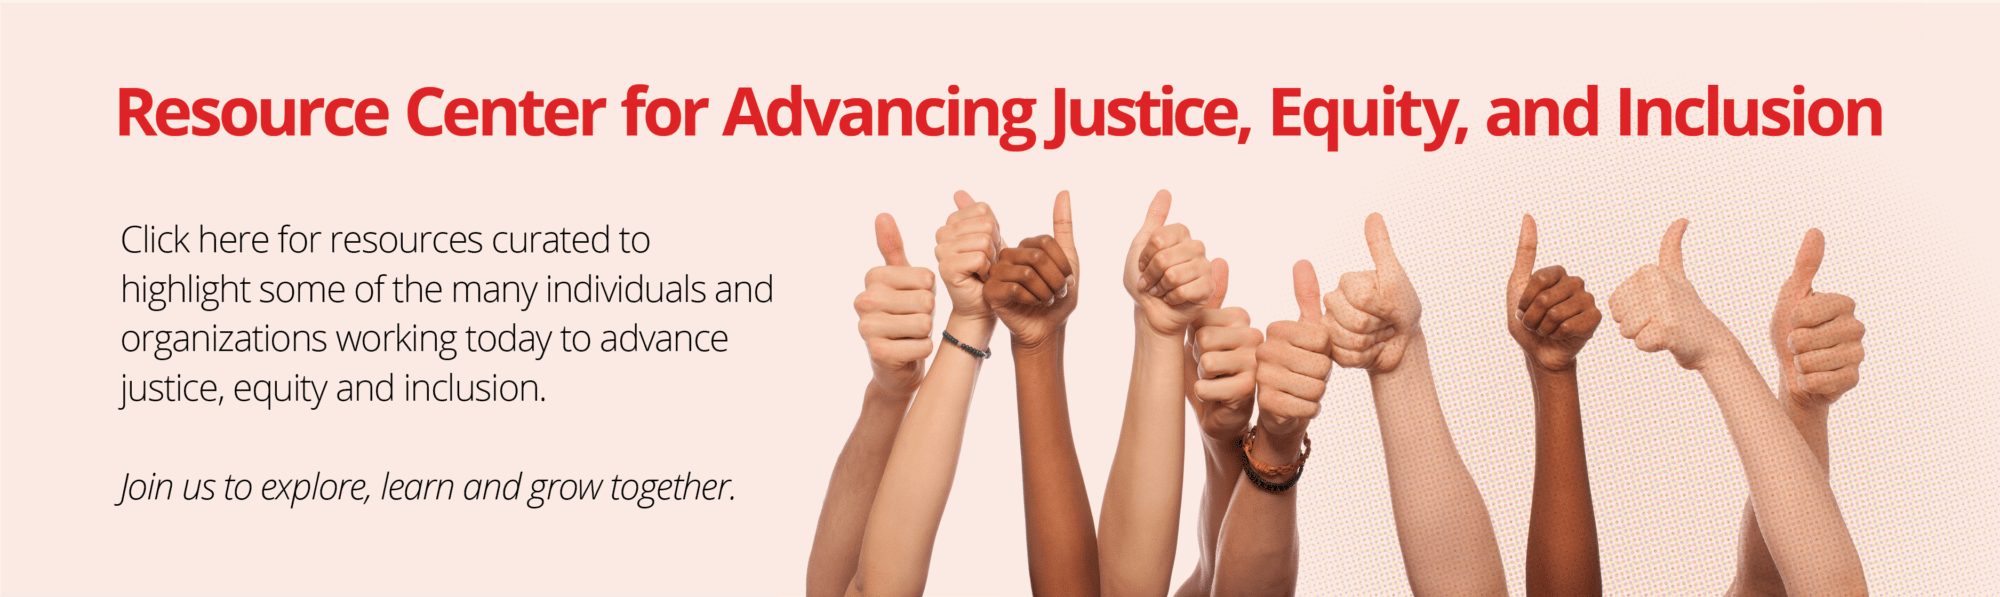 Visit the Resource Center for Advancing Justice, Equity, and Inclusion